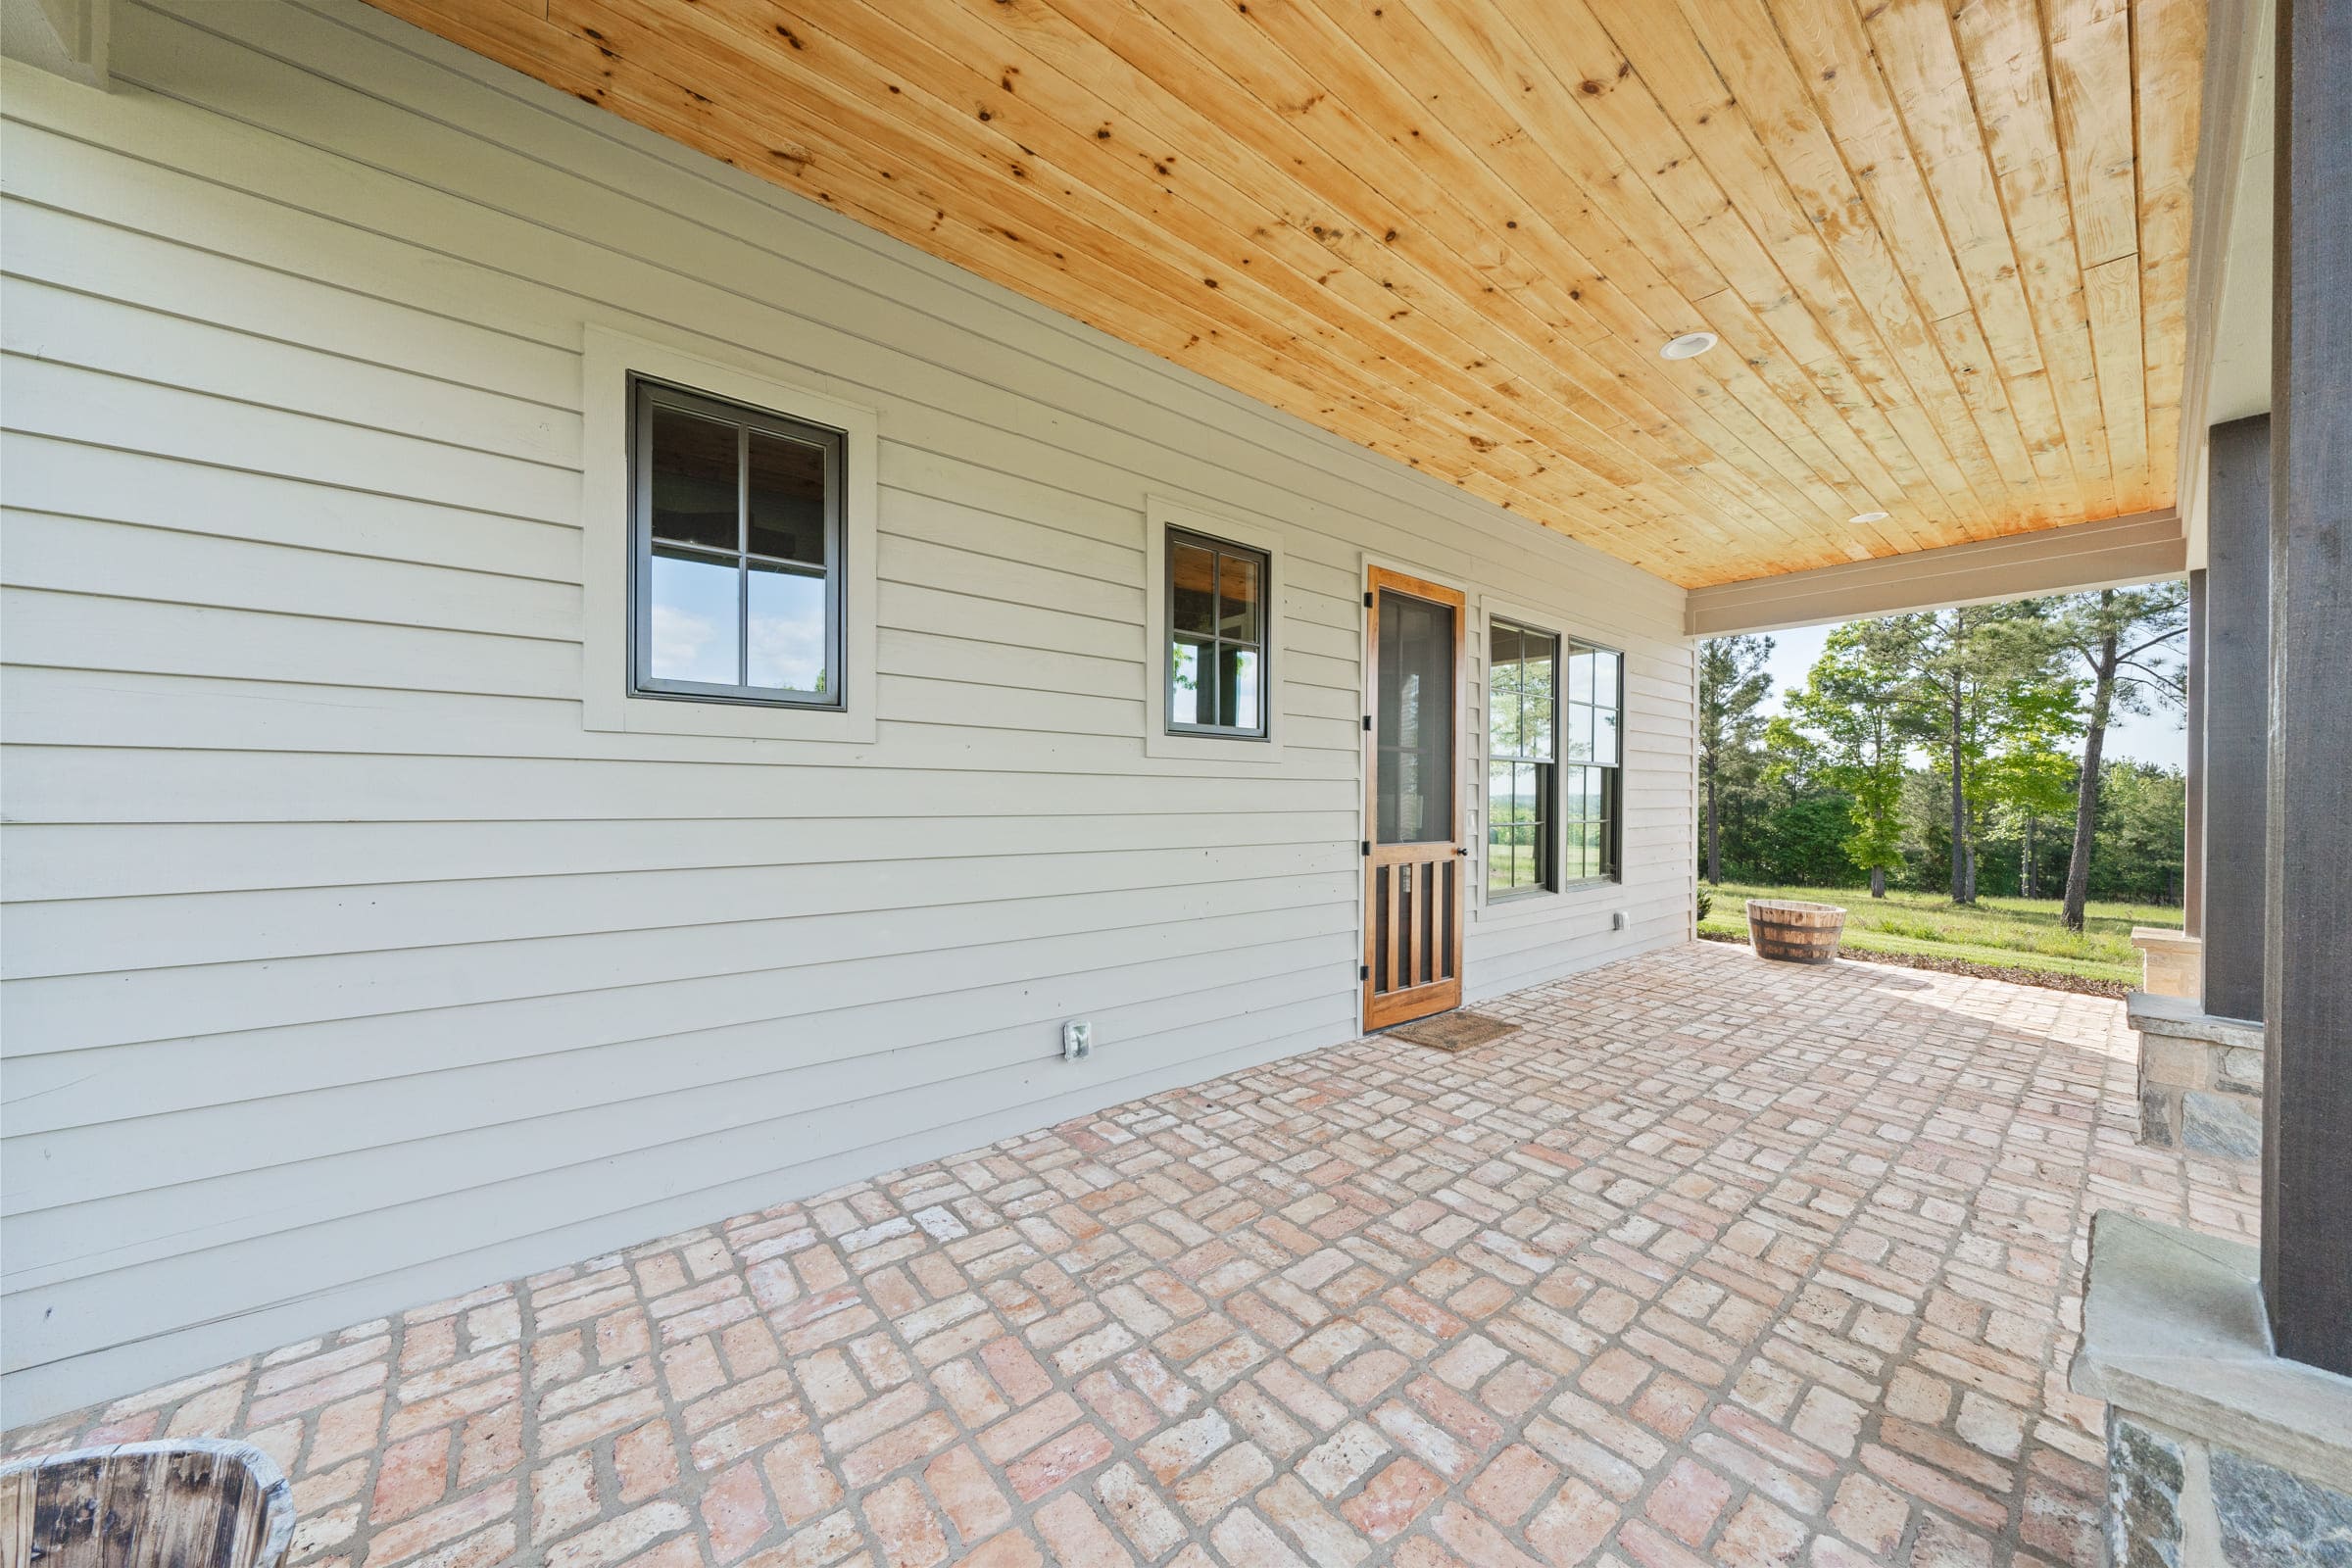 Front Brick Patio with Light Wood Ceiling | PAXISgroup